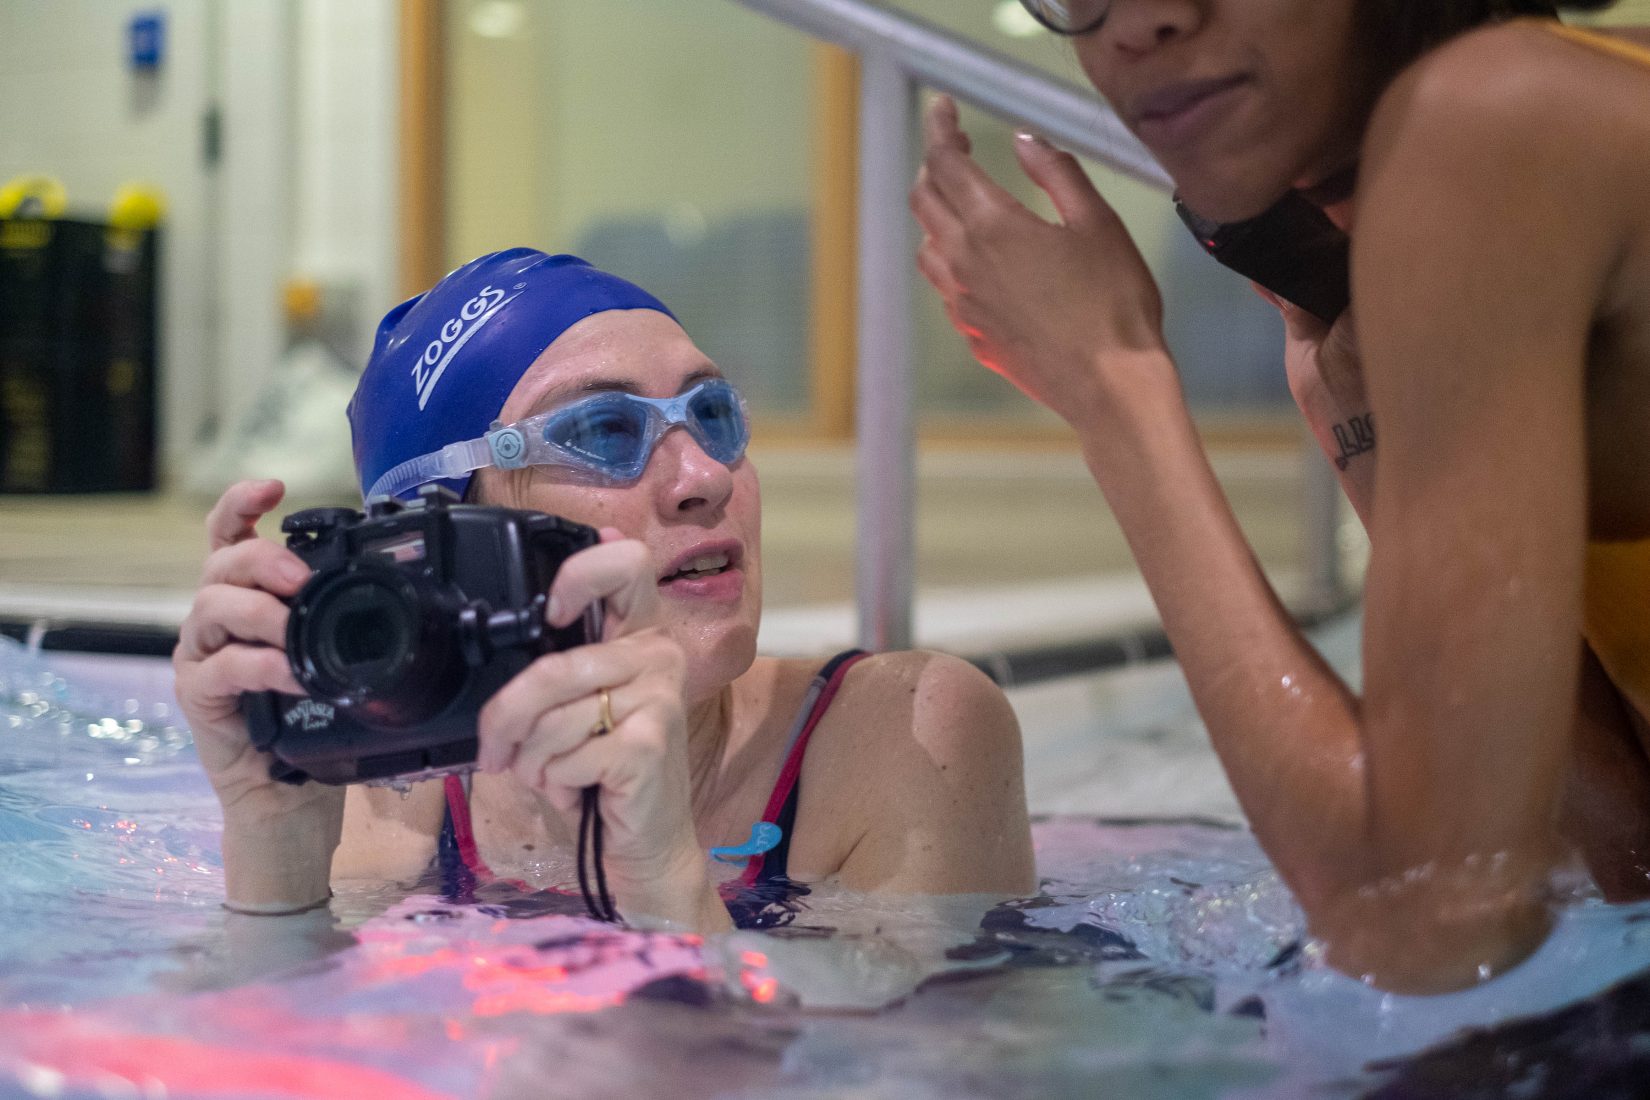 A woman wearing a swimming cap and goggles is in a pool, holding a camera in both hands just above the water. She looks at the woman beside her in the pool.